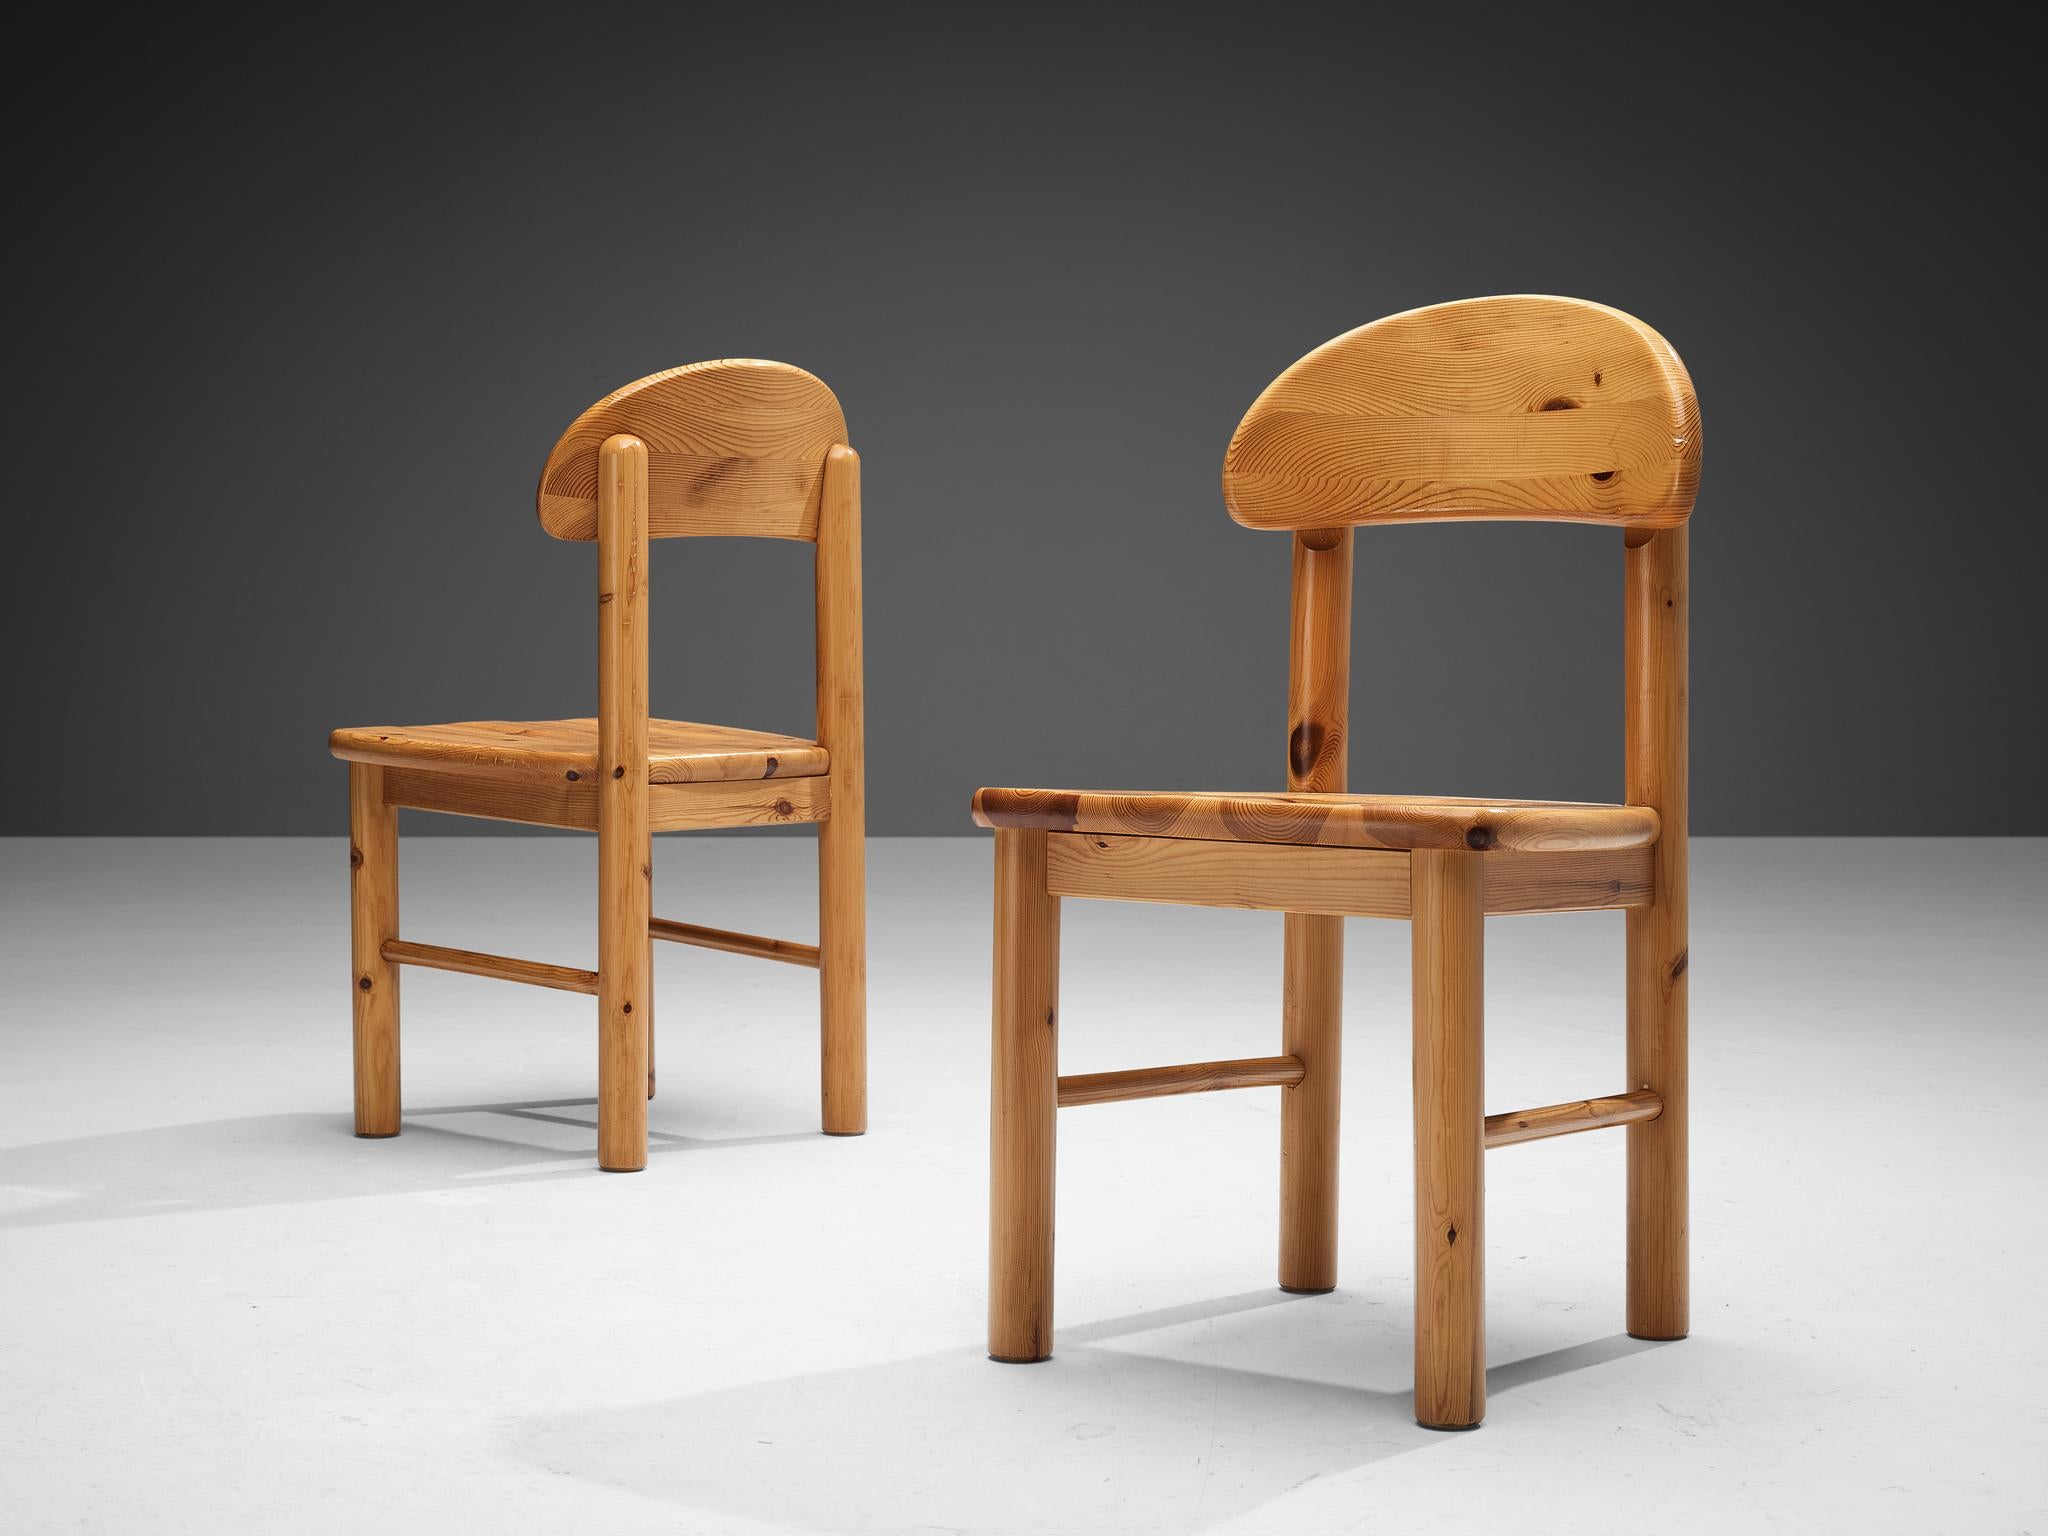 Rainer Daumiller for Hirtshals Sawmill, pair of dining chairs, pine, Denmark, 1970s

Beautiful, organic and natural dining chairs designed by Rainer Daumiller in solid pine. A simplistic design with round seats and attention for the natural